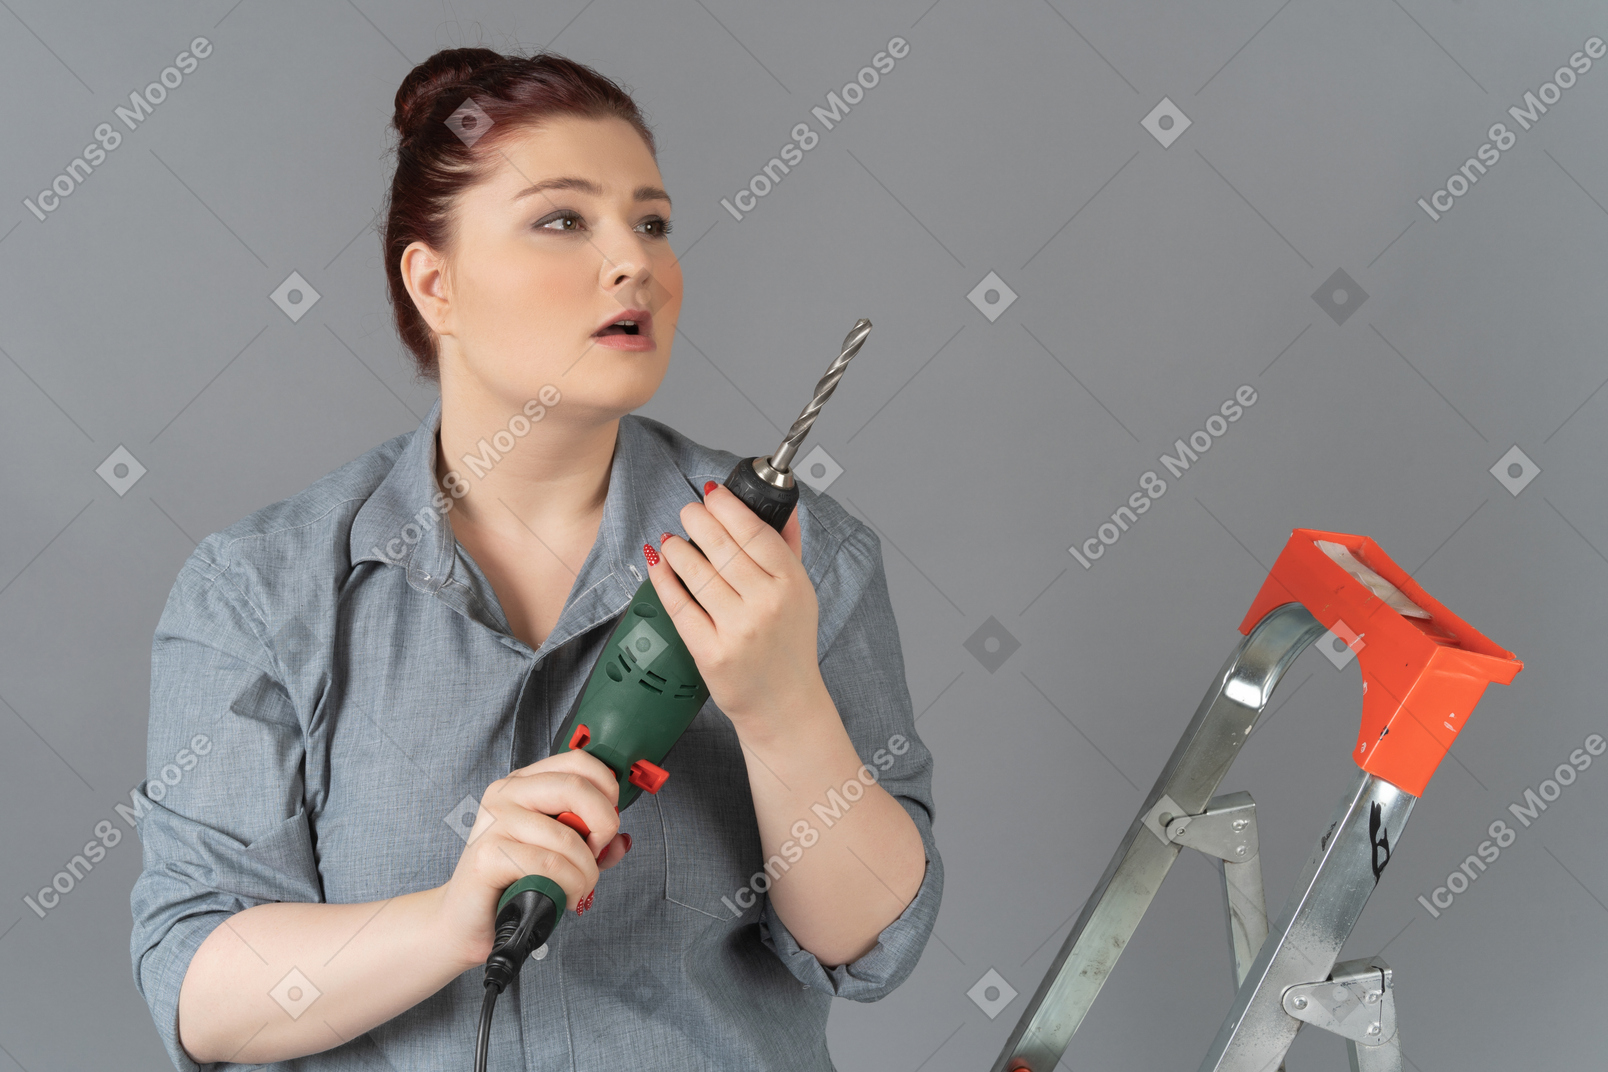 Young woman looking surprisingly sideways and holding a drill